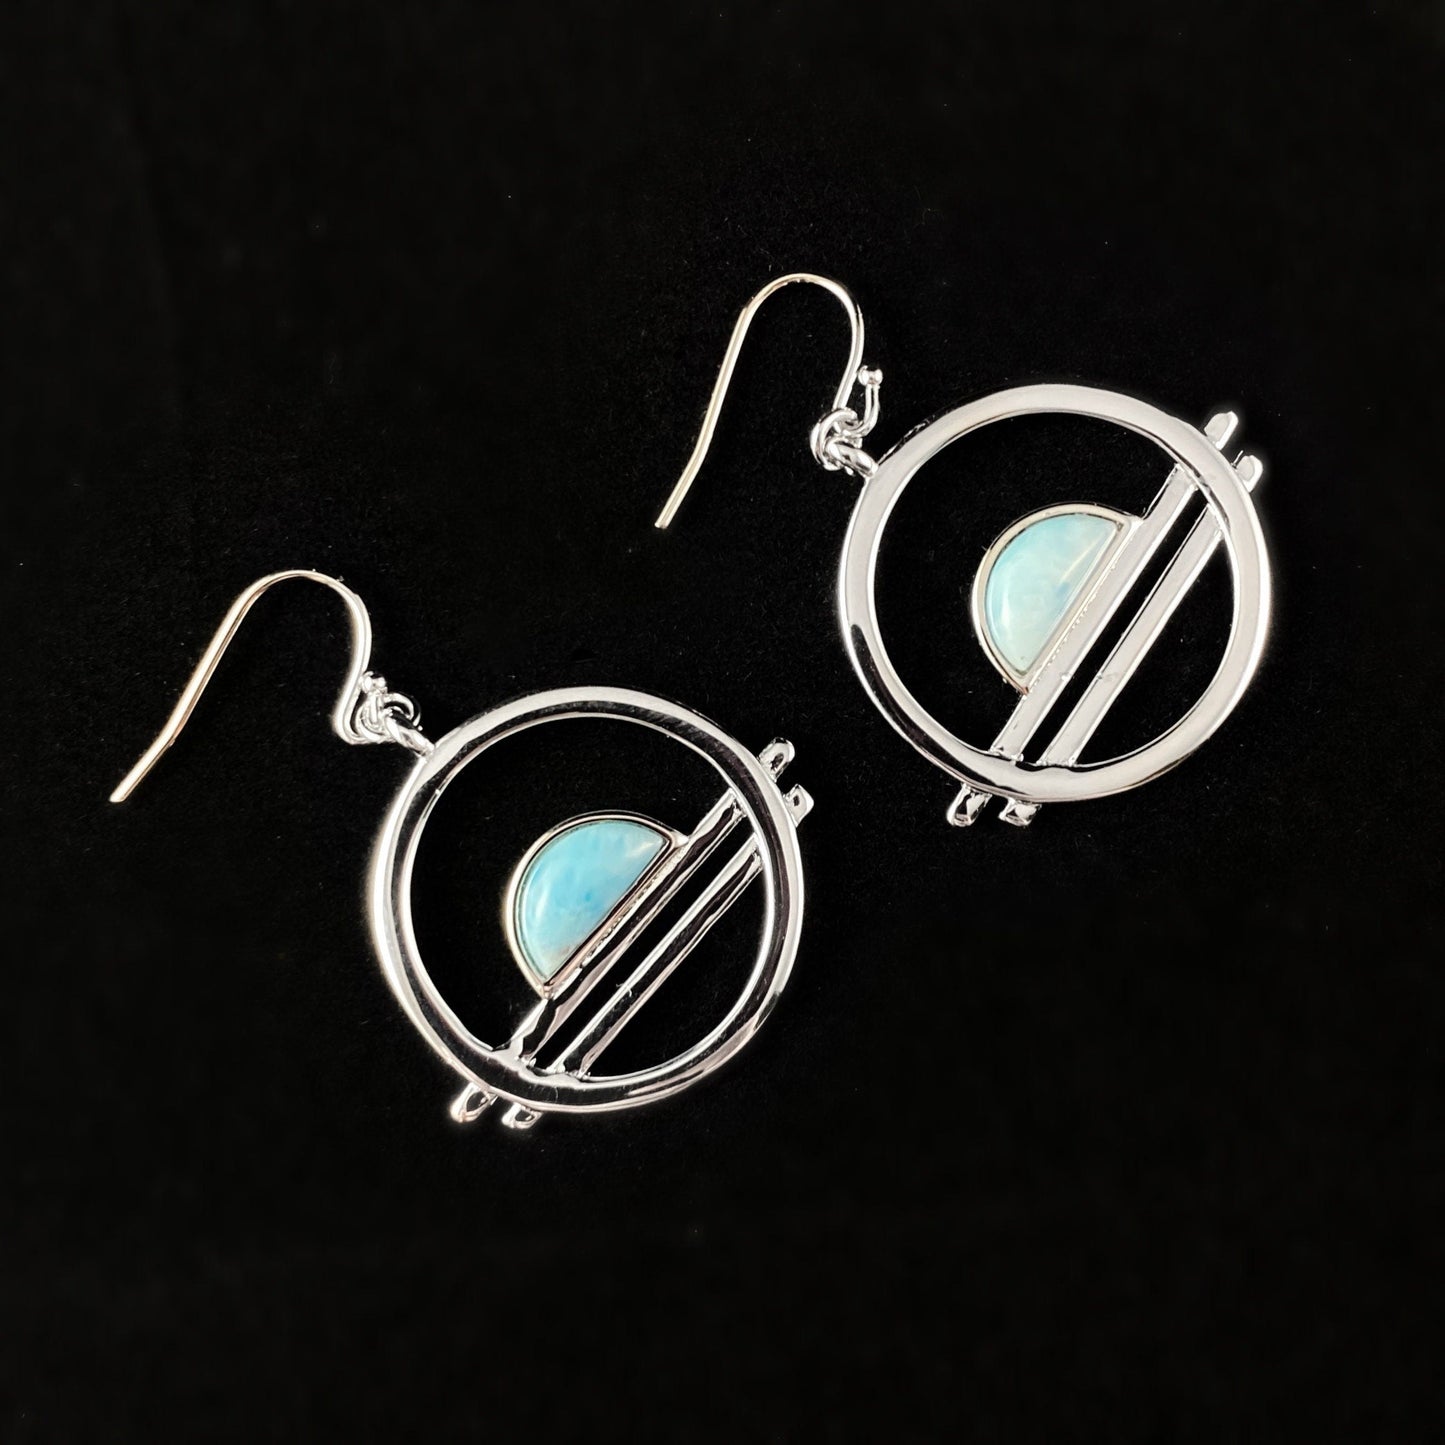 1920s Silver Abstract Statement Earrings with Blue Larimar Stone Accents - Ocean Drive